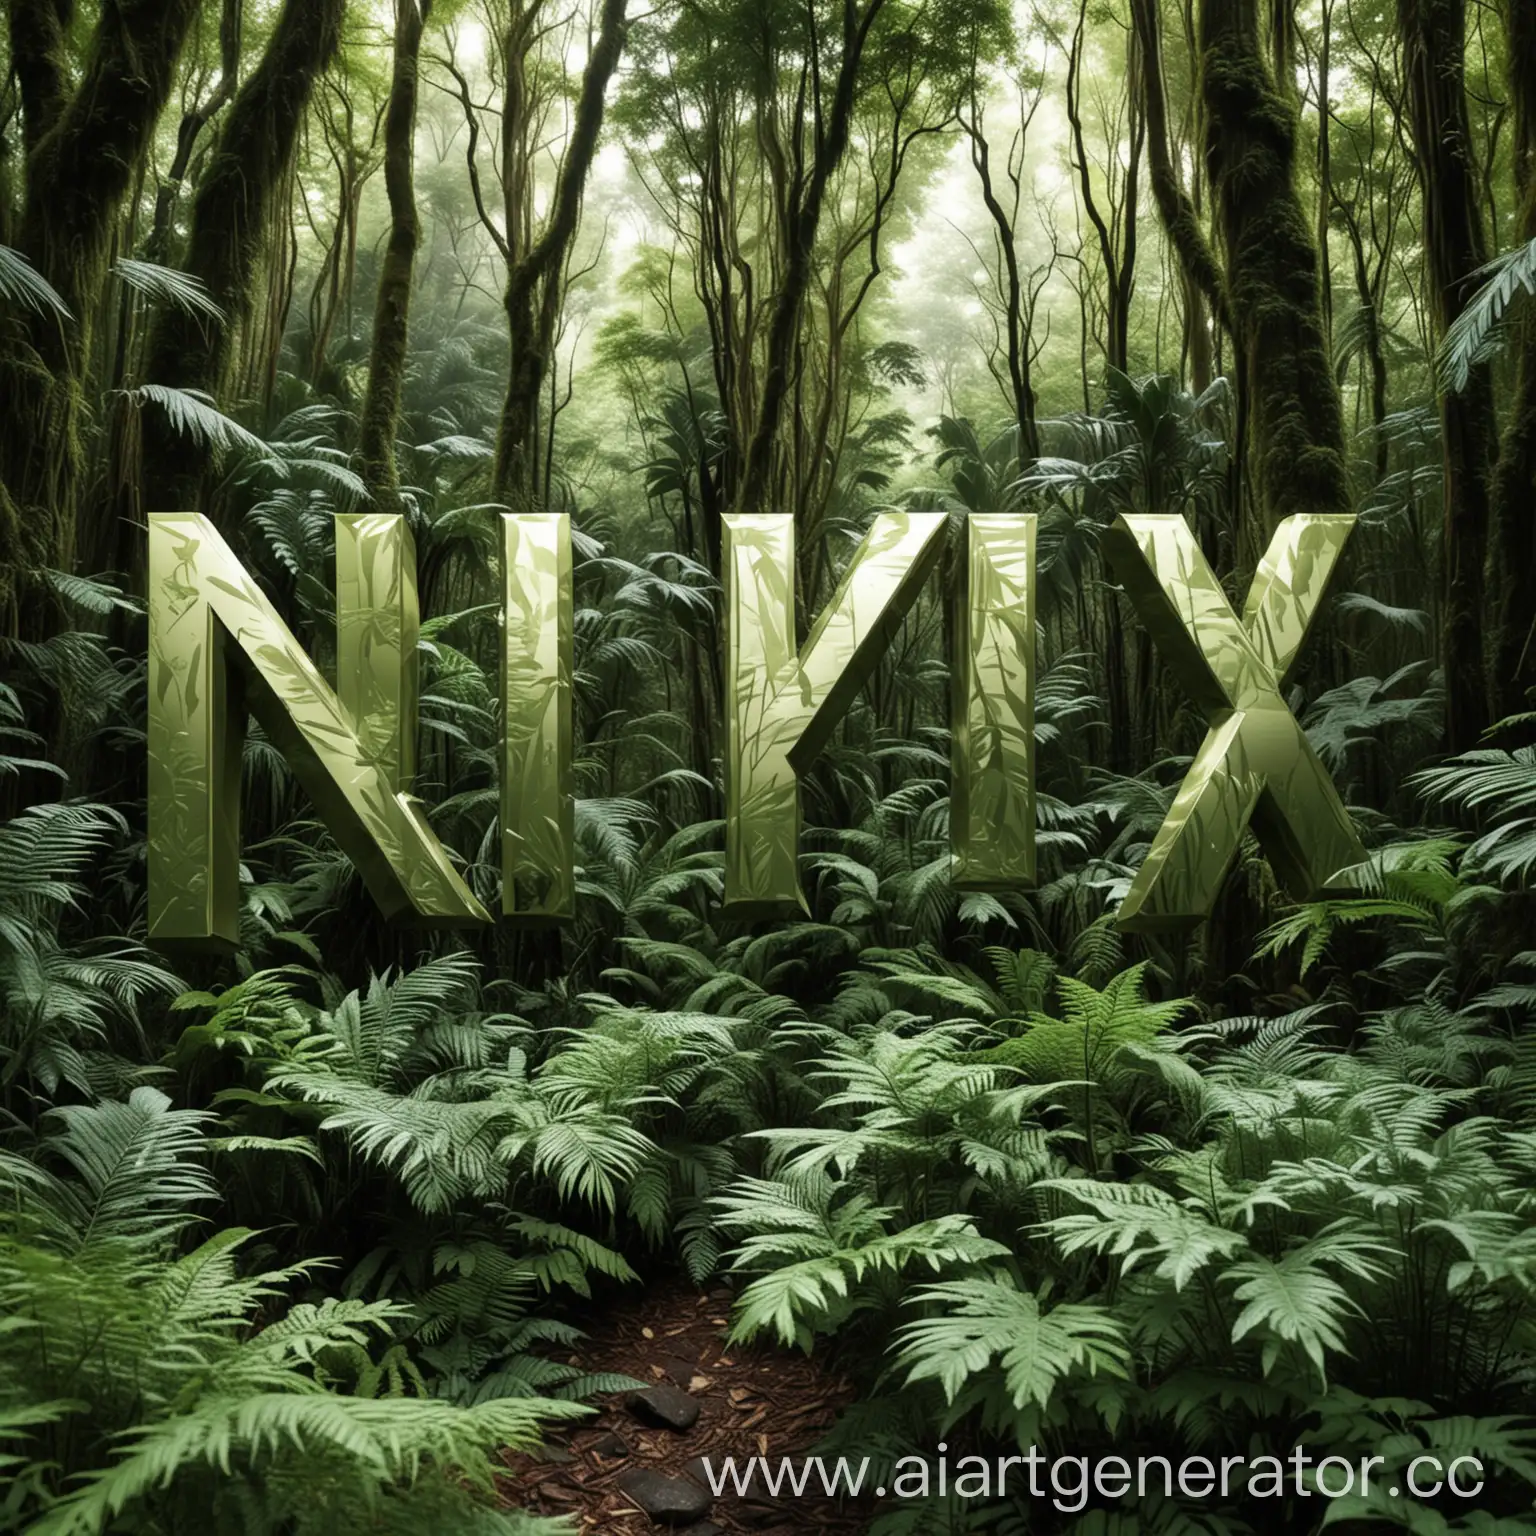 Wild-Jungle-Landscape-with-Metallic-NzX-Text